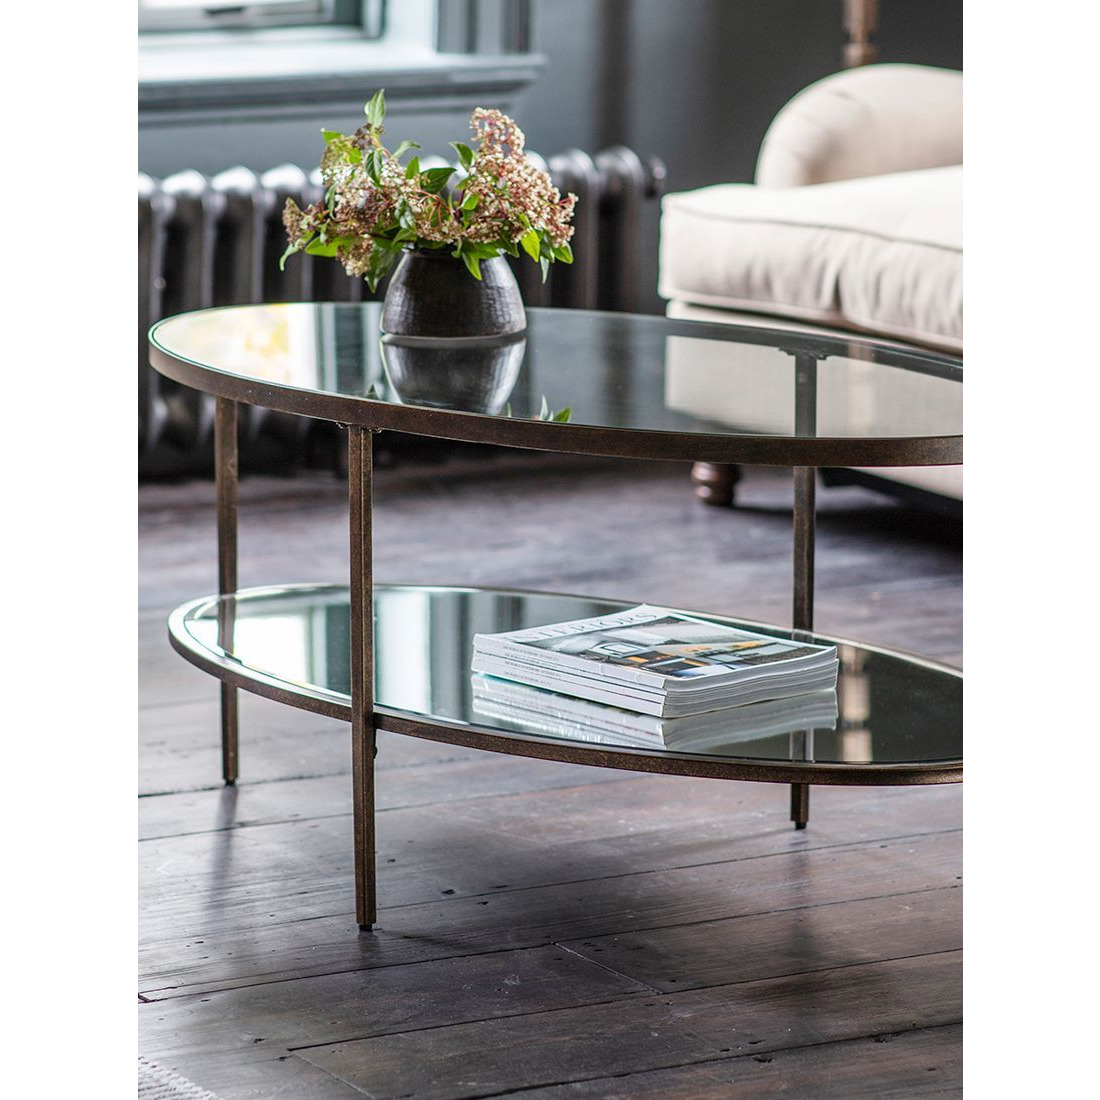 Gallery Direct Siena Coffee Table, Bronze - image 1